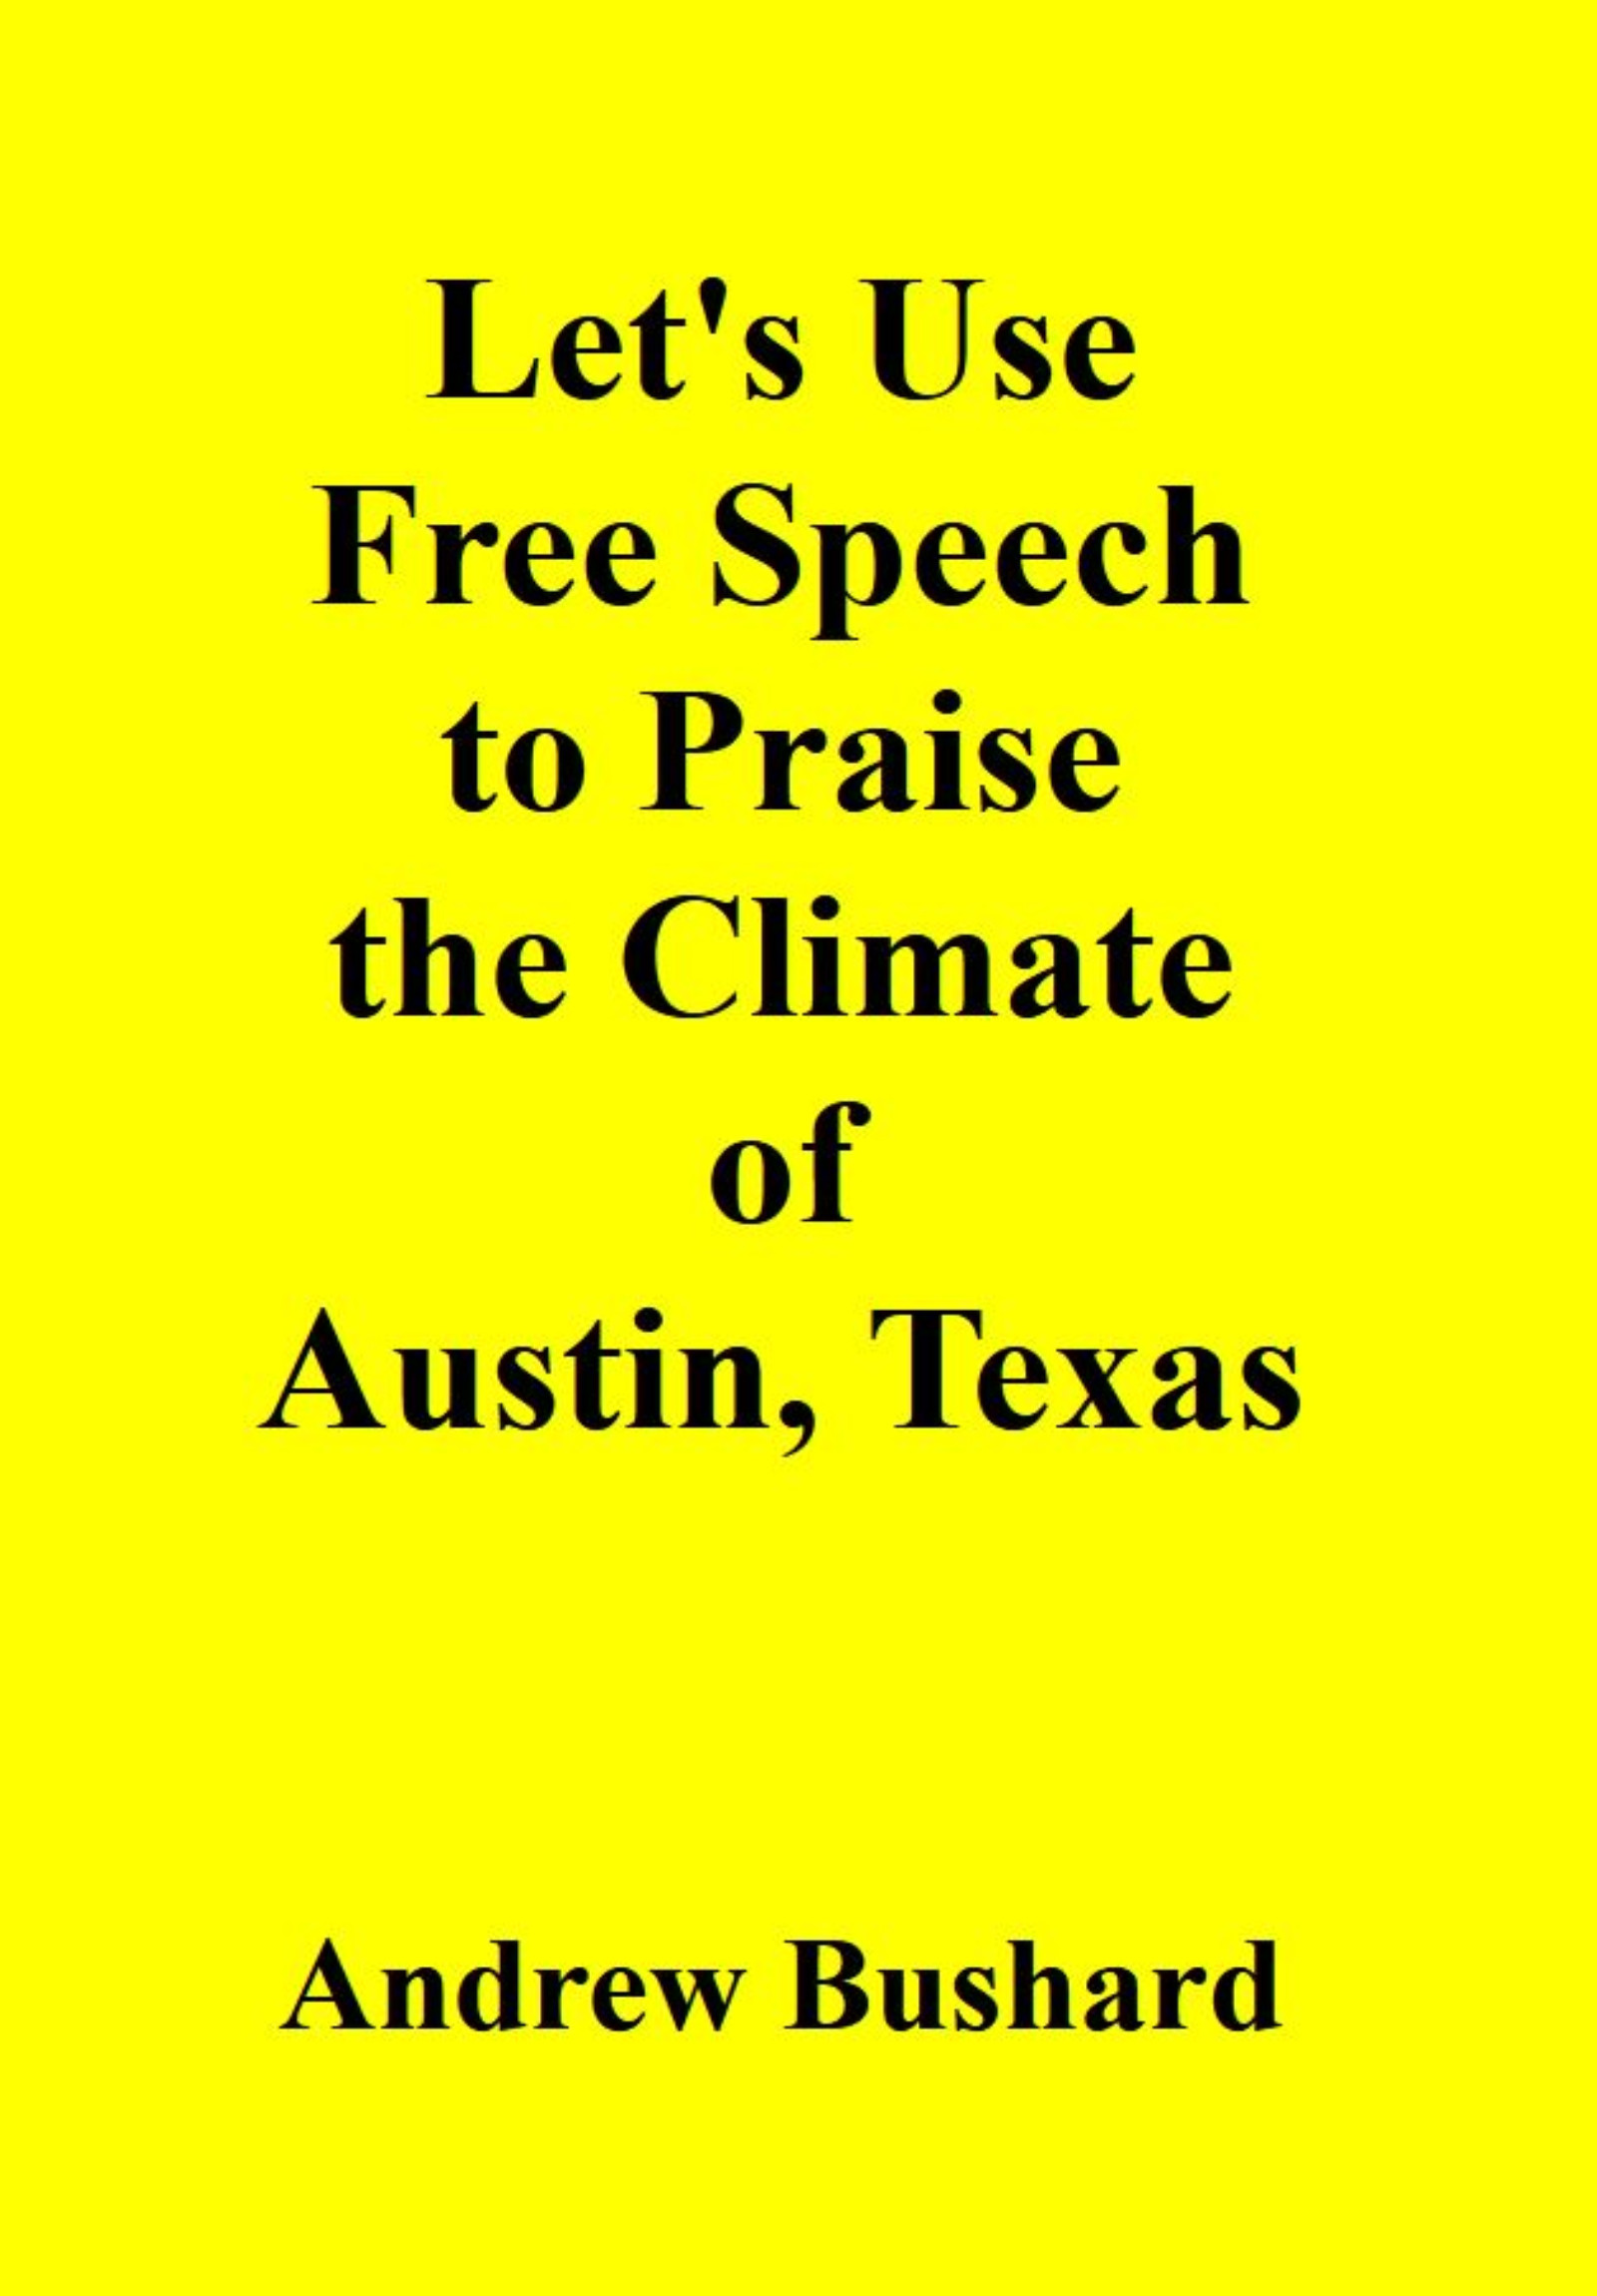 Let's Use Free Speech to Praise the Climate of Austin, Texas's featured image